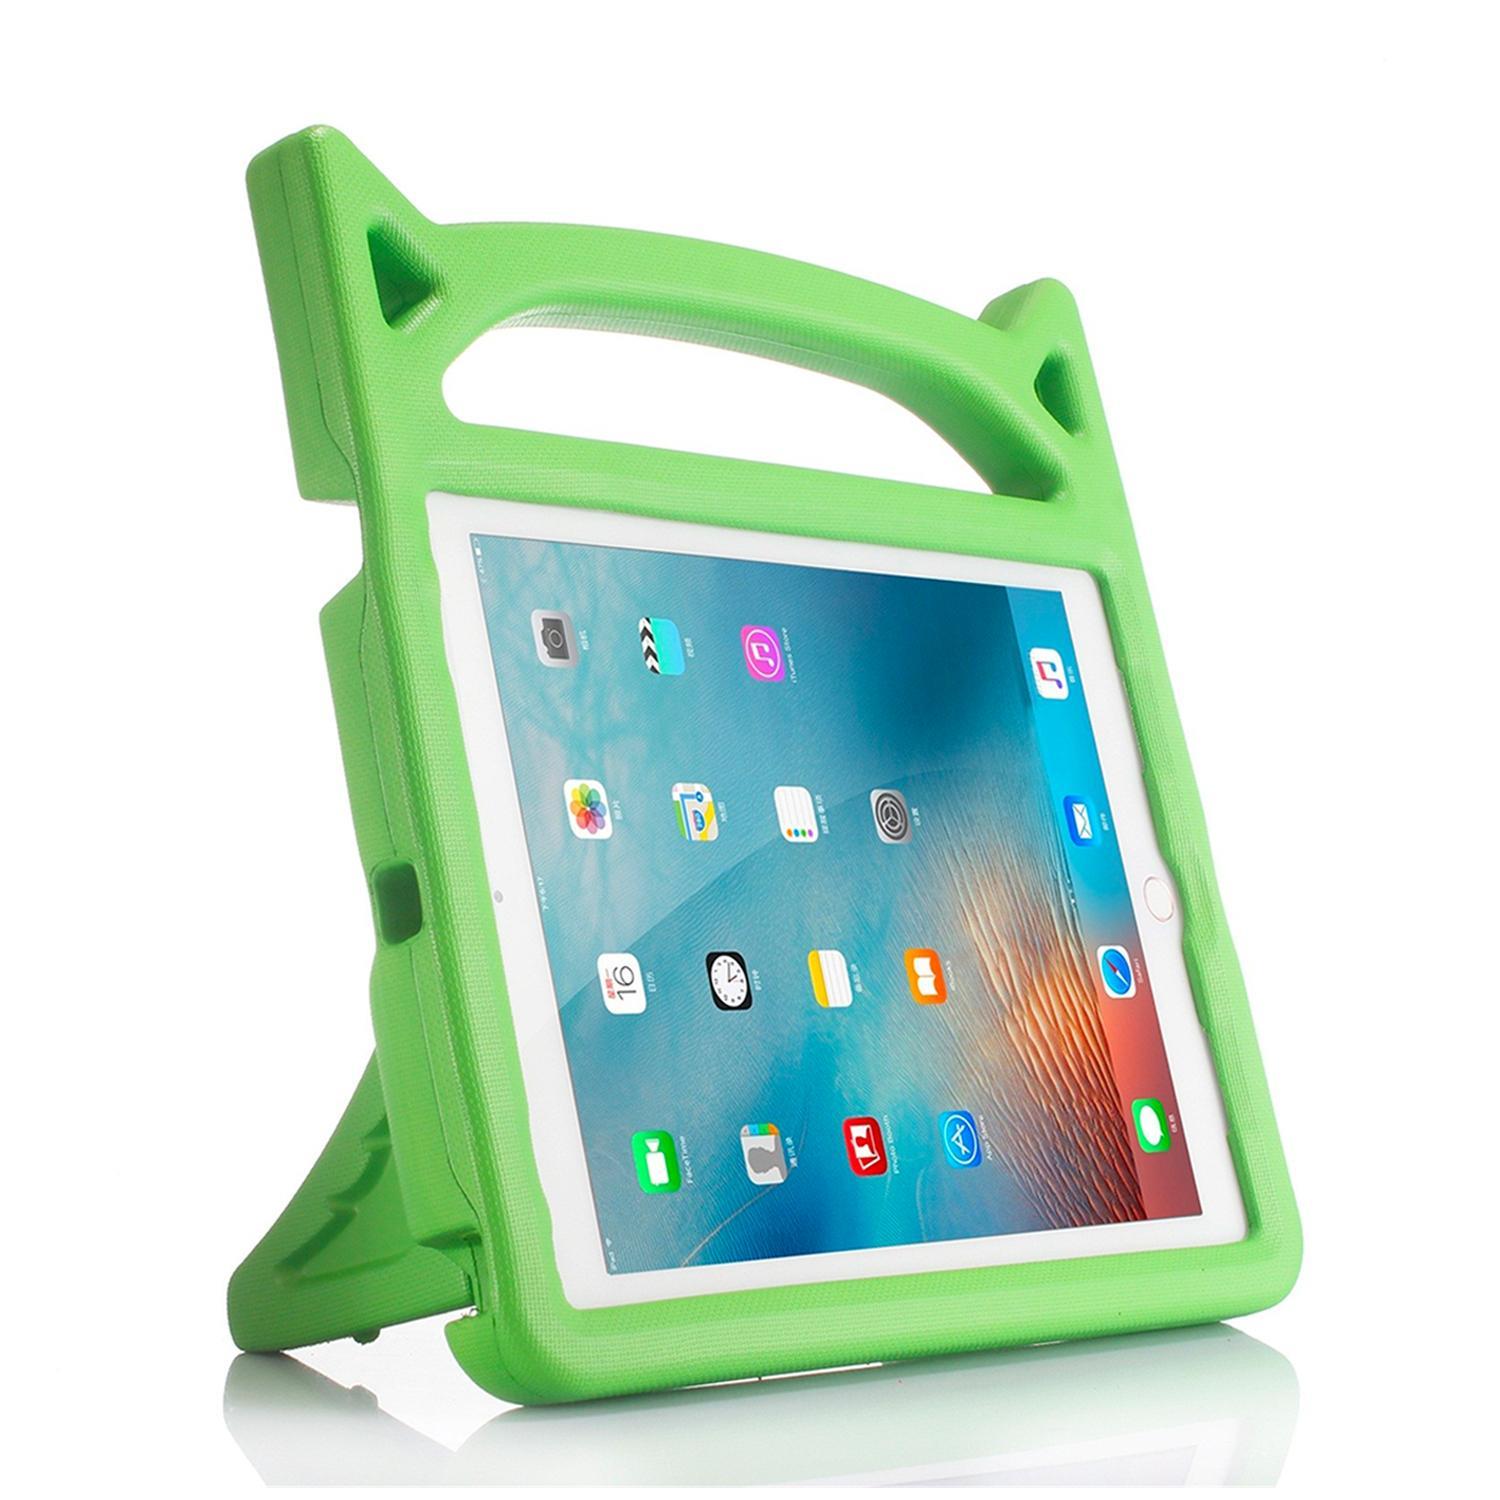 ZUSLAB Kids iPad 4 / 3 / 2 Case, Durable Shockproof Handle Stand Protective Cover for Apple (2012/2011) - Green